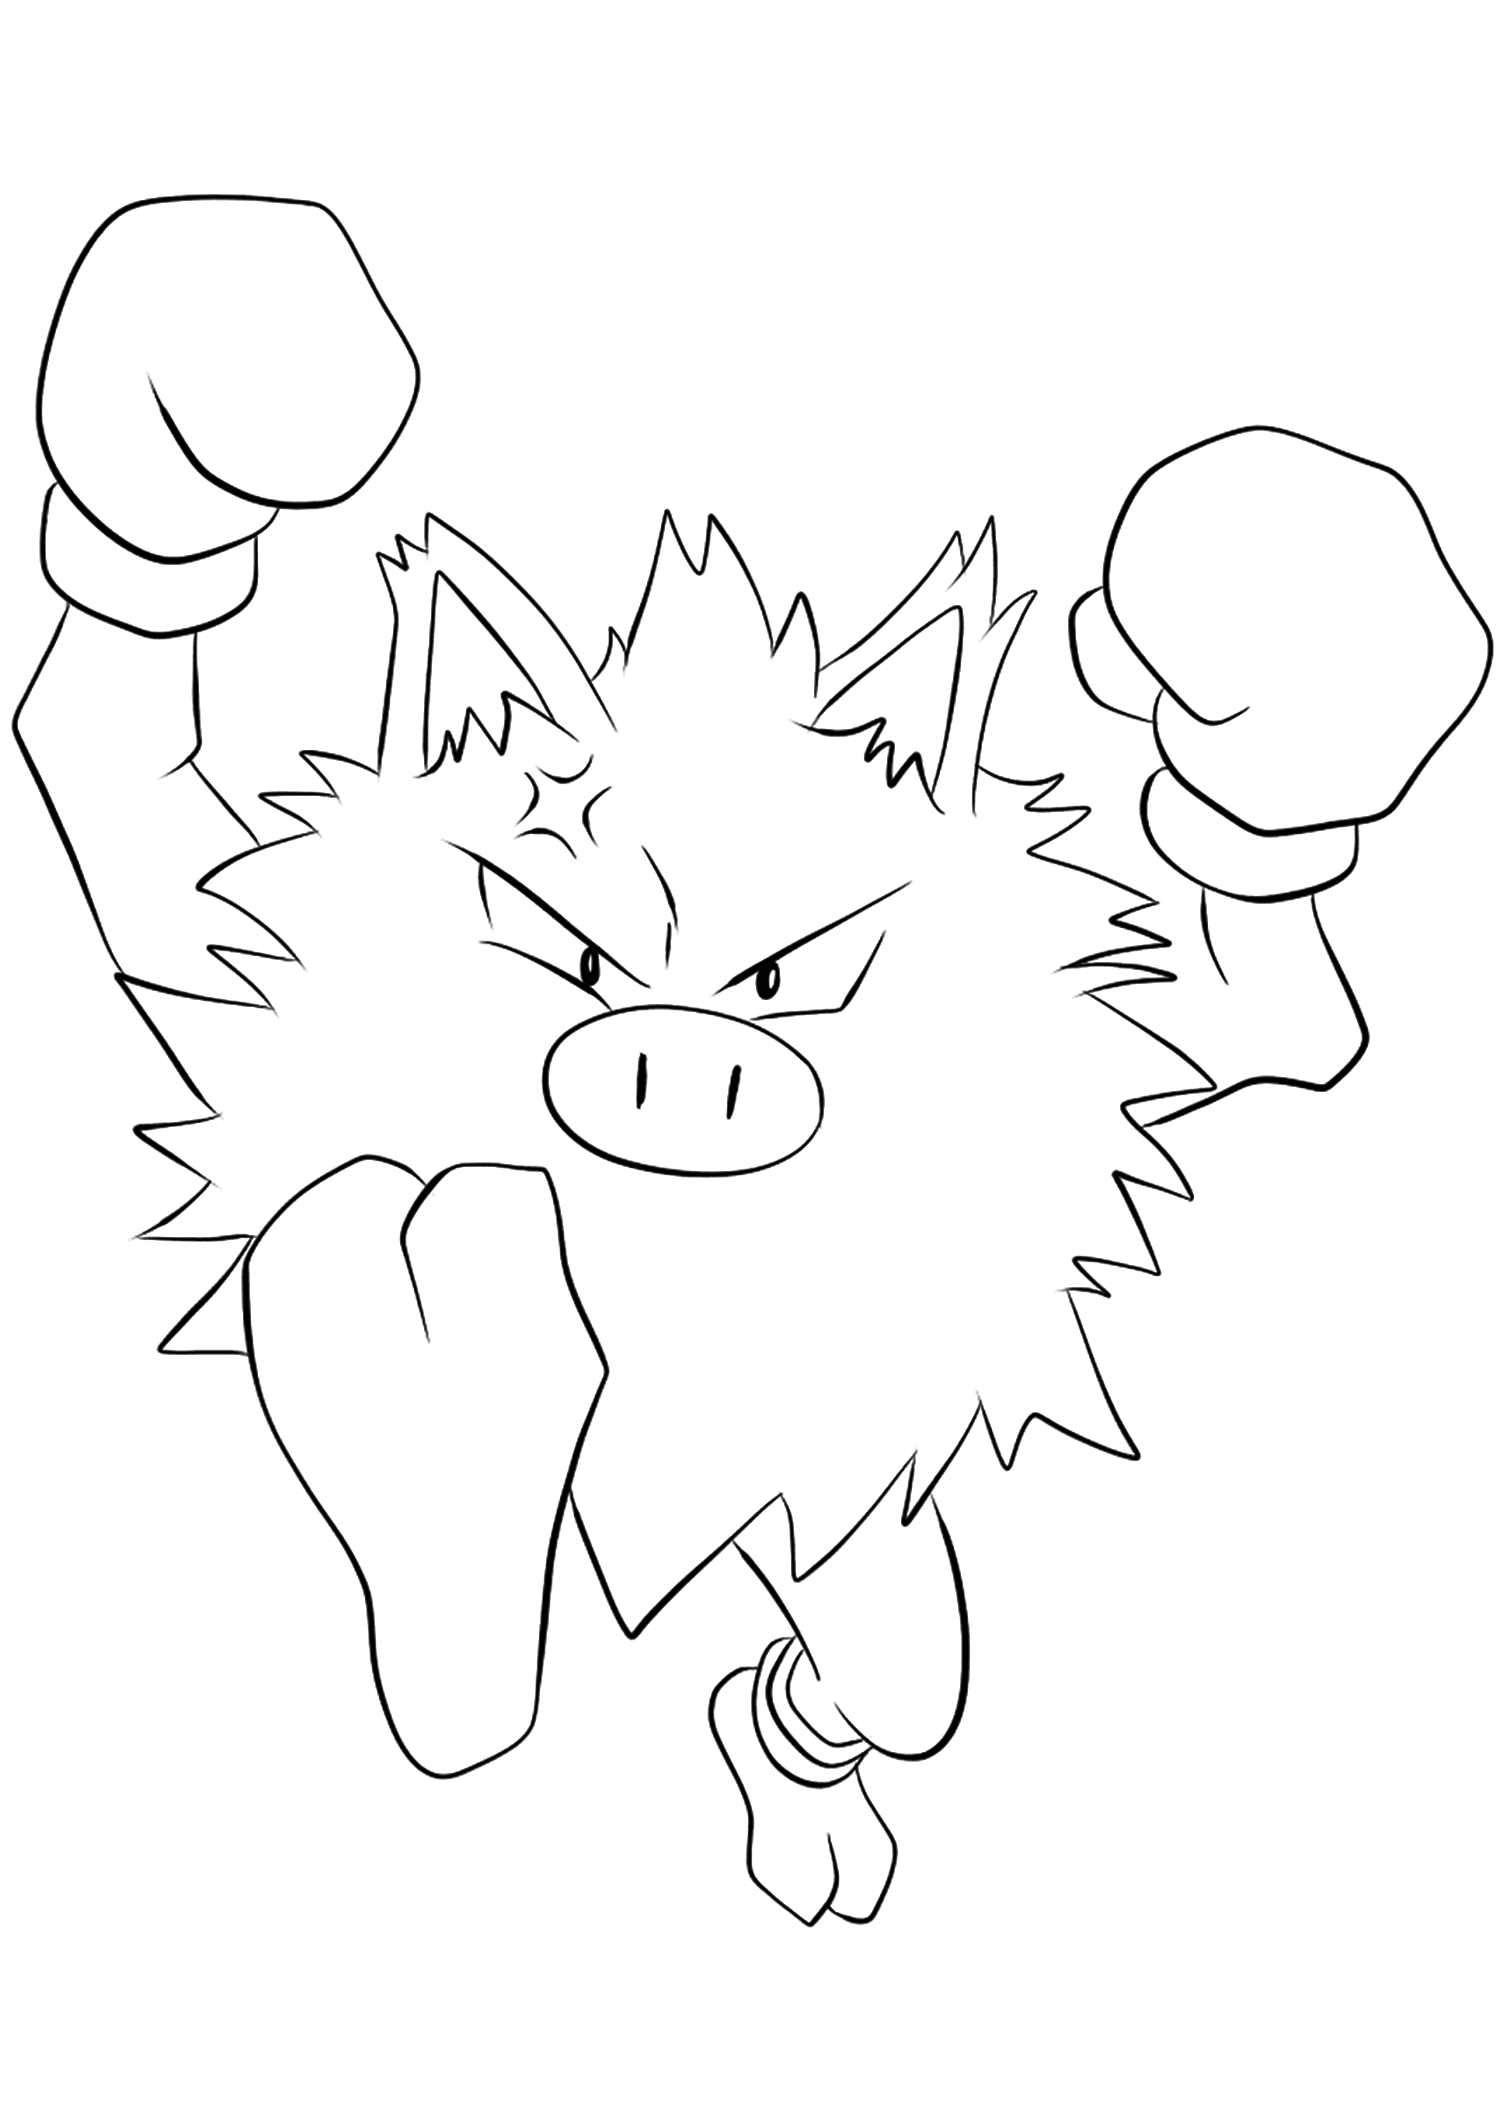 Primeape (No.57). Primeape Coloring page, Generation I Pokemon of type FightingOriginal image credit: Pokemon linearts by Lilly Gerbil on Deviantart.Permission:  All rights reserved © Pokemon company and Ken Sugimori.